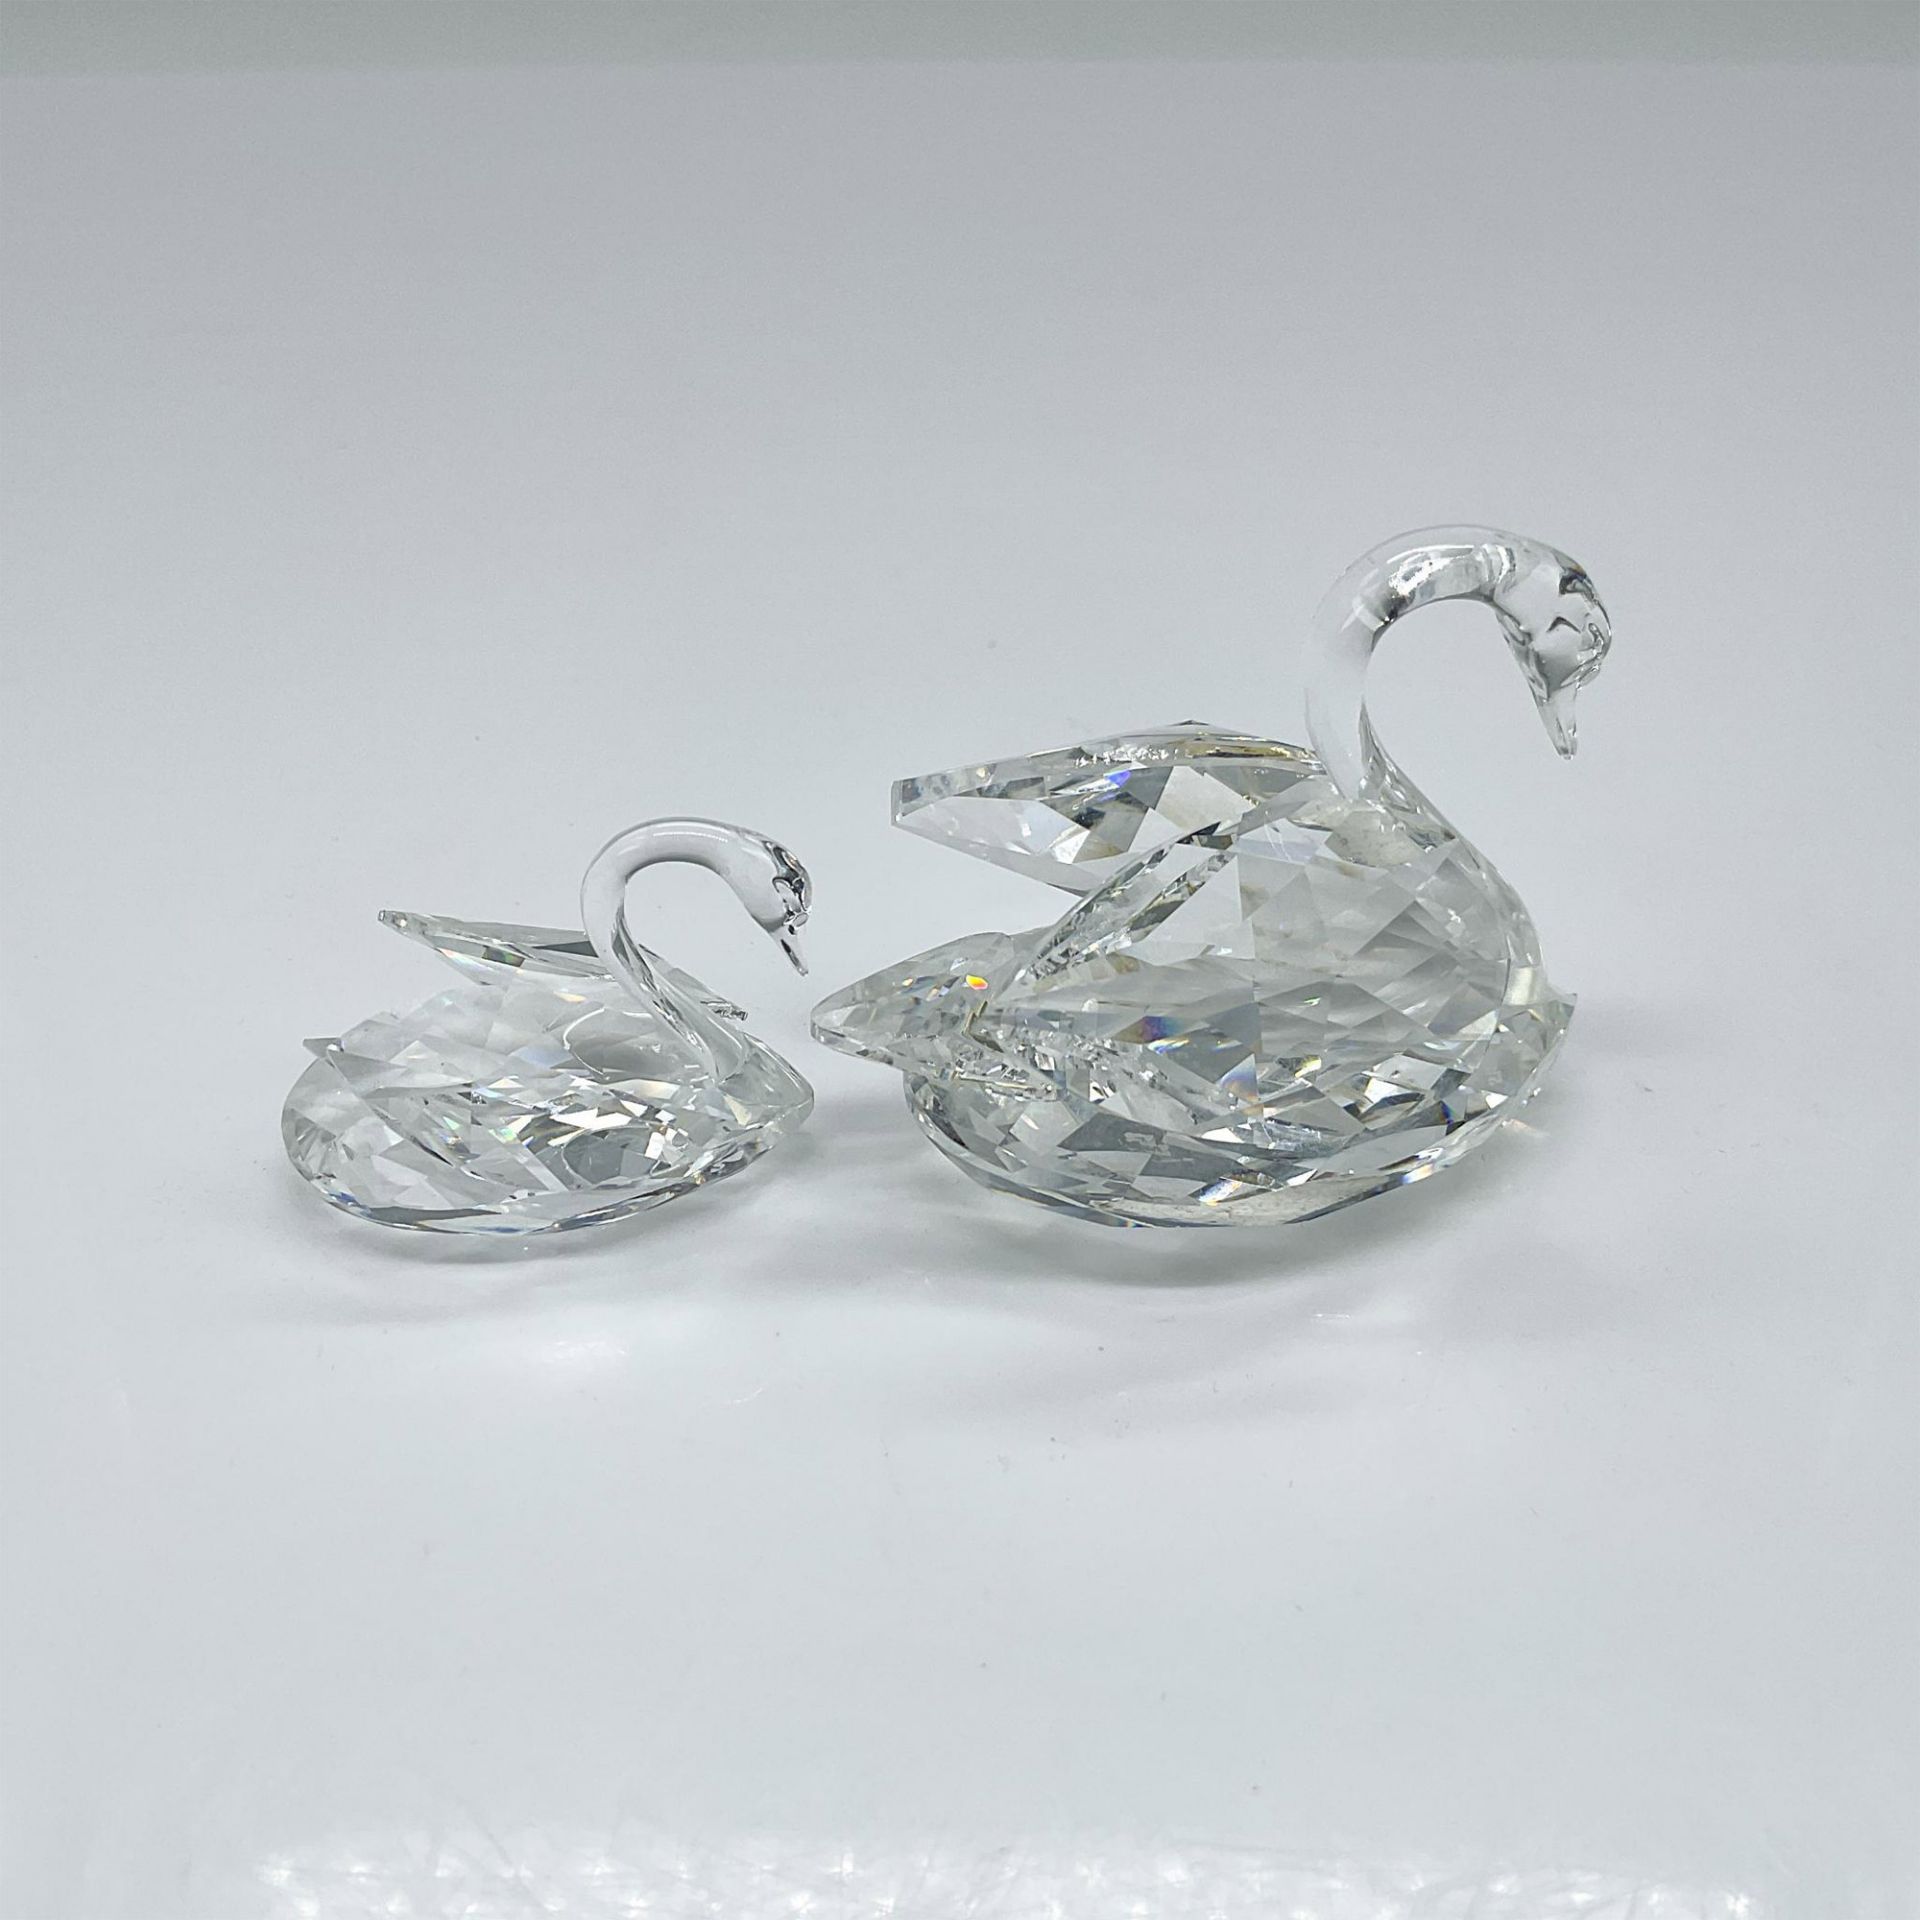 2pc Swarovski Crystal Figurines, Swans Large and Small - Image 2 of 4